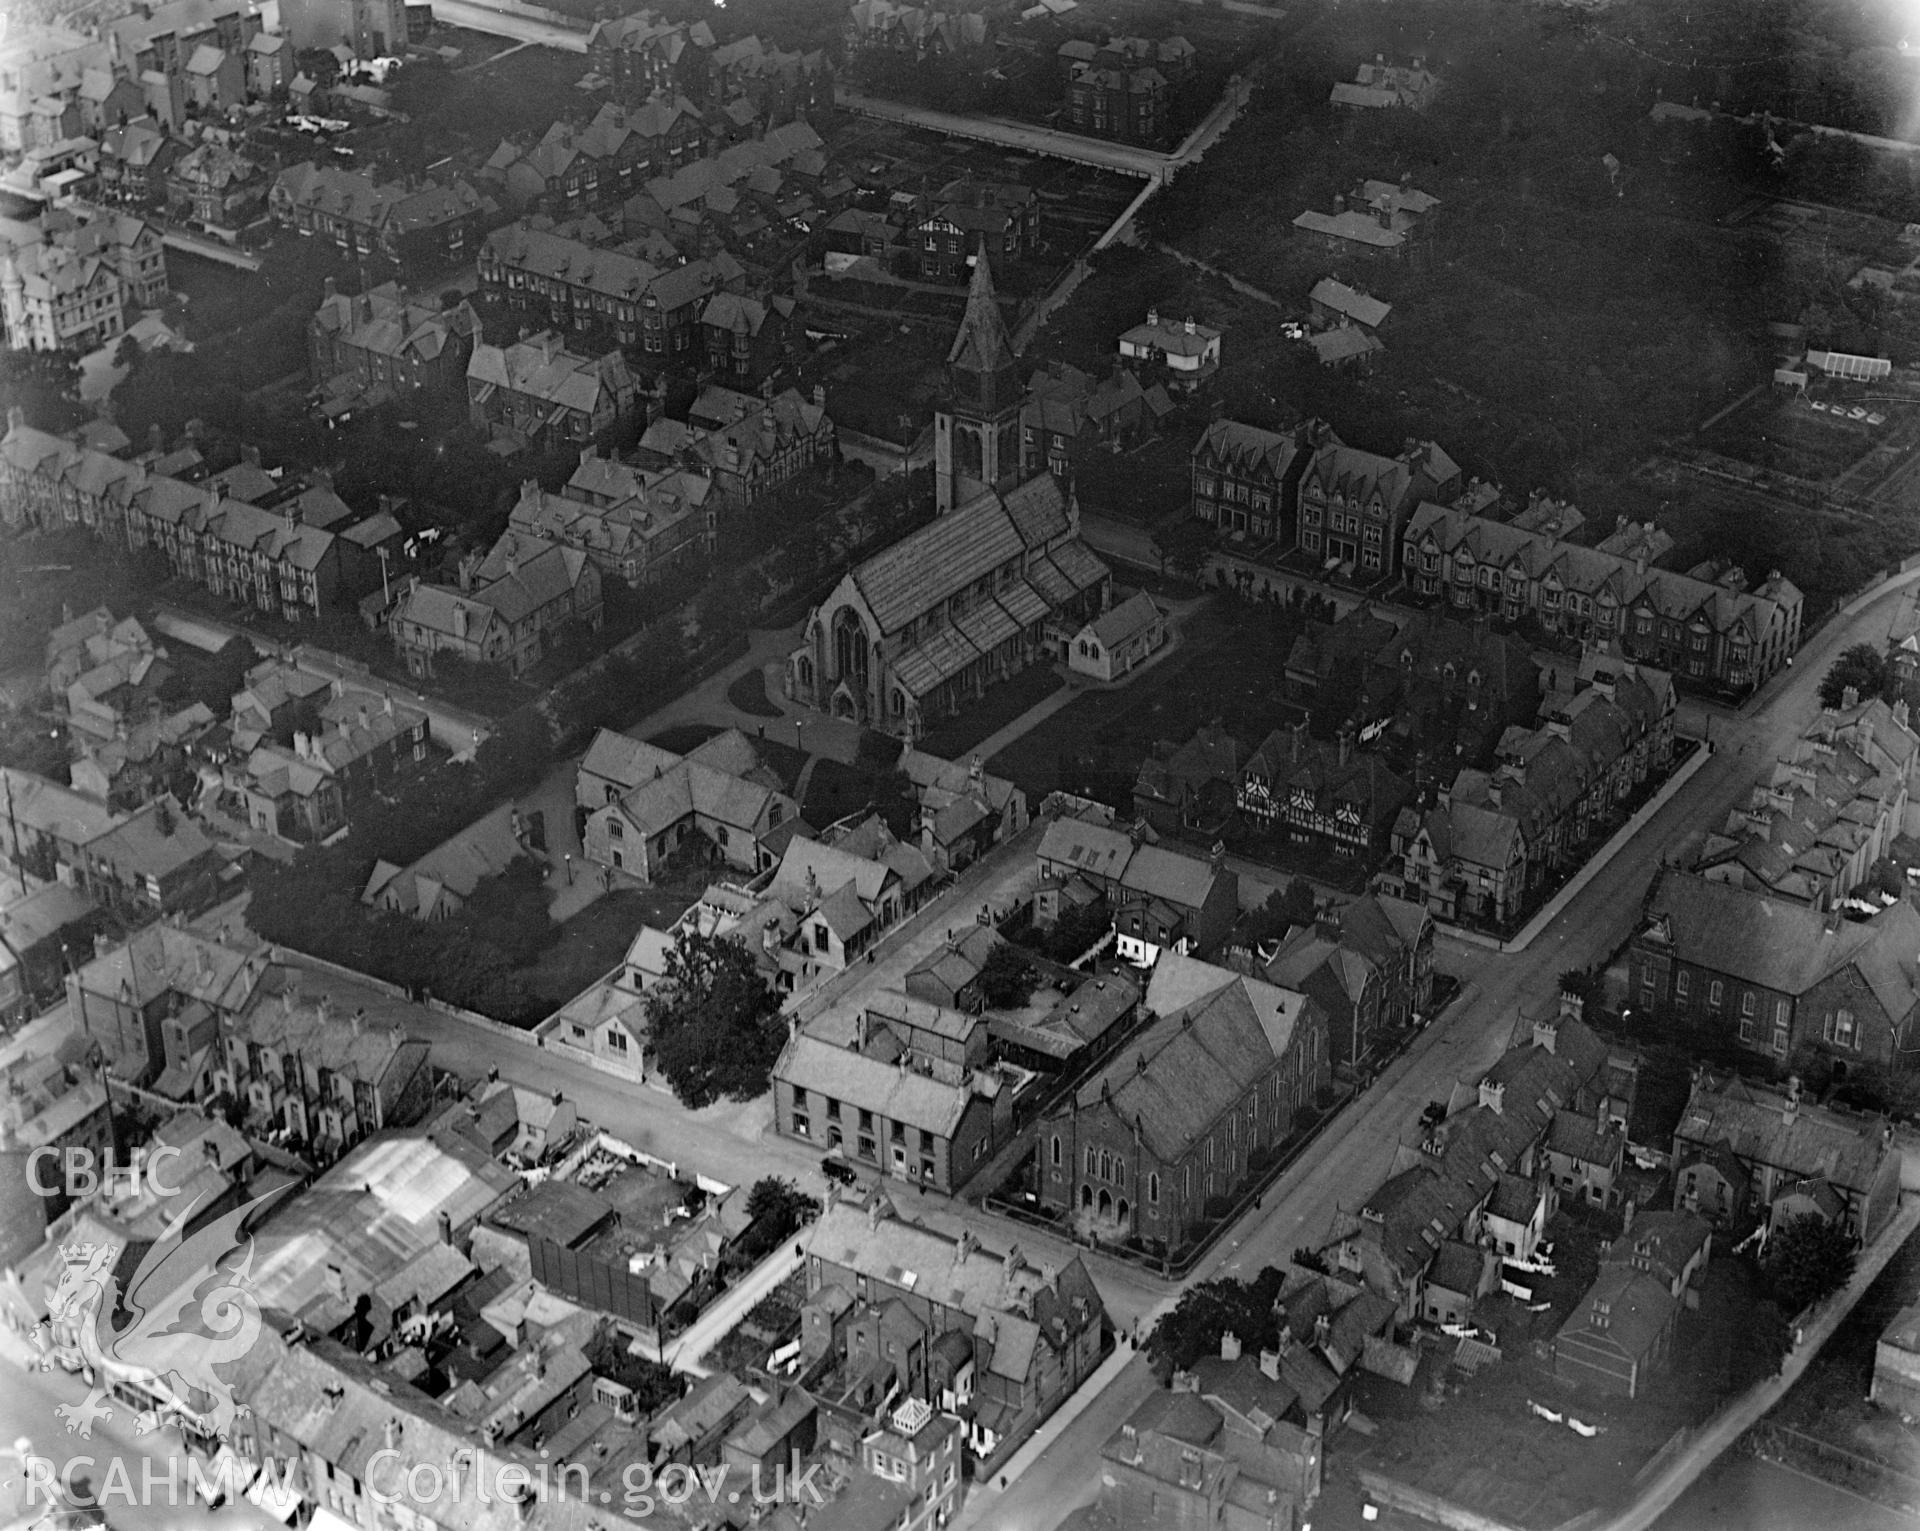 View of Rhyl showing St Thomas's church, oblique aerial view. 5?x4? black and white glass plate negative.